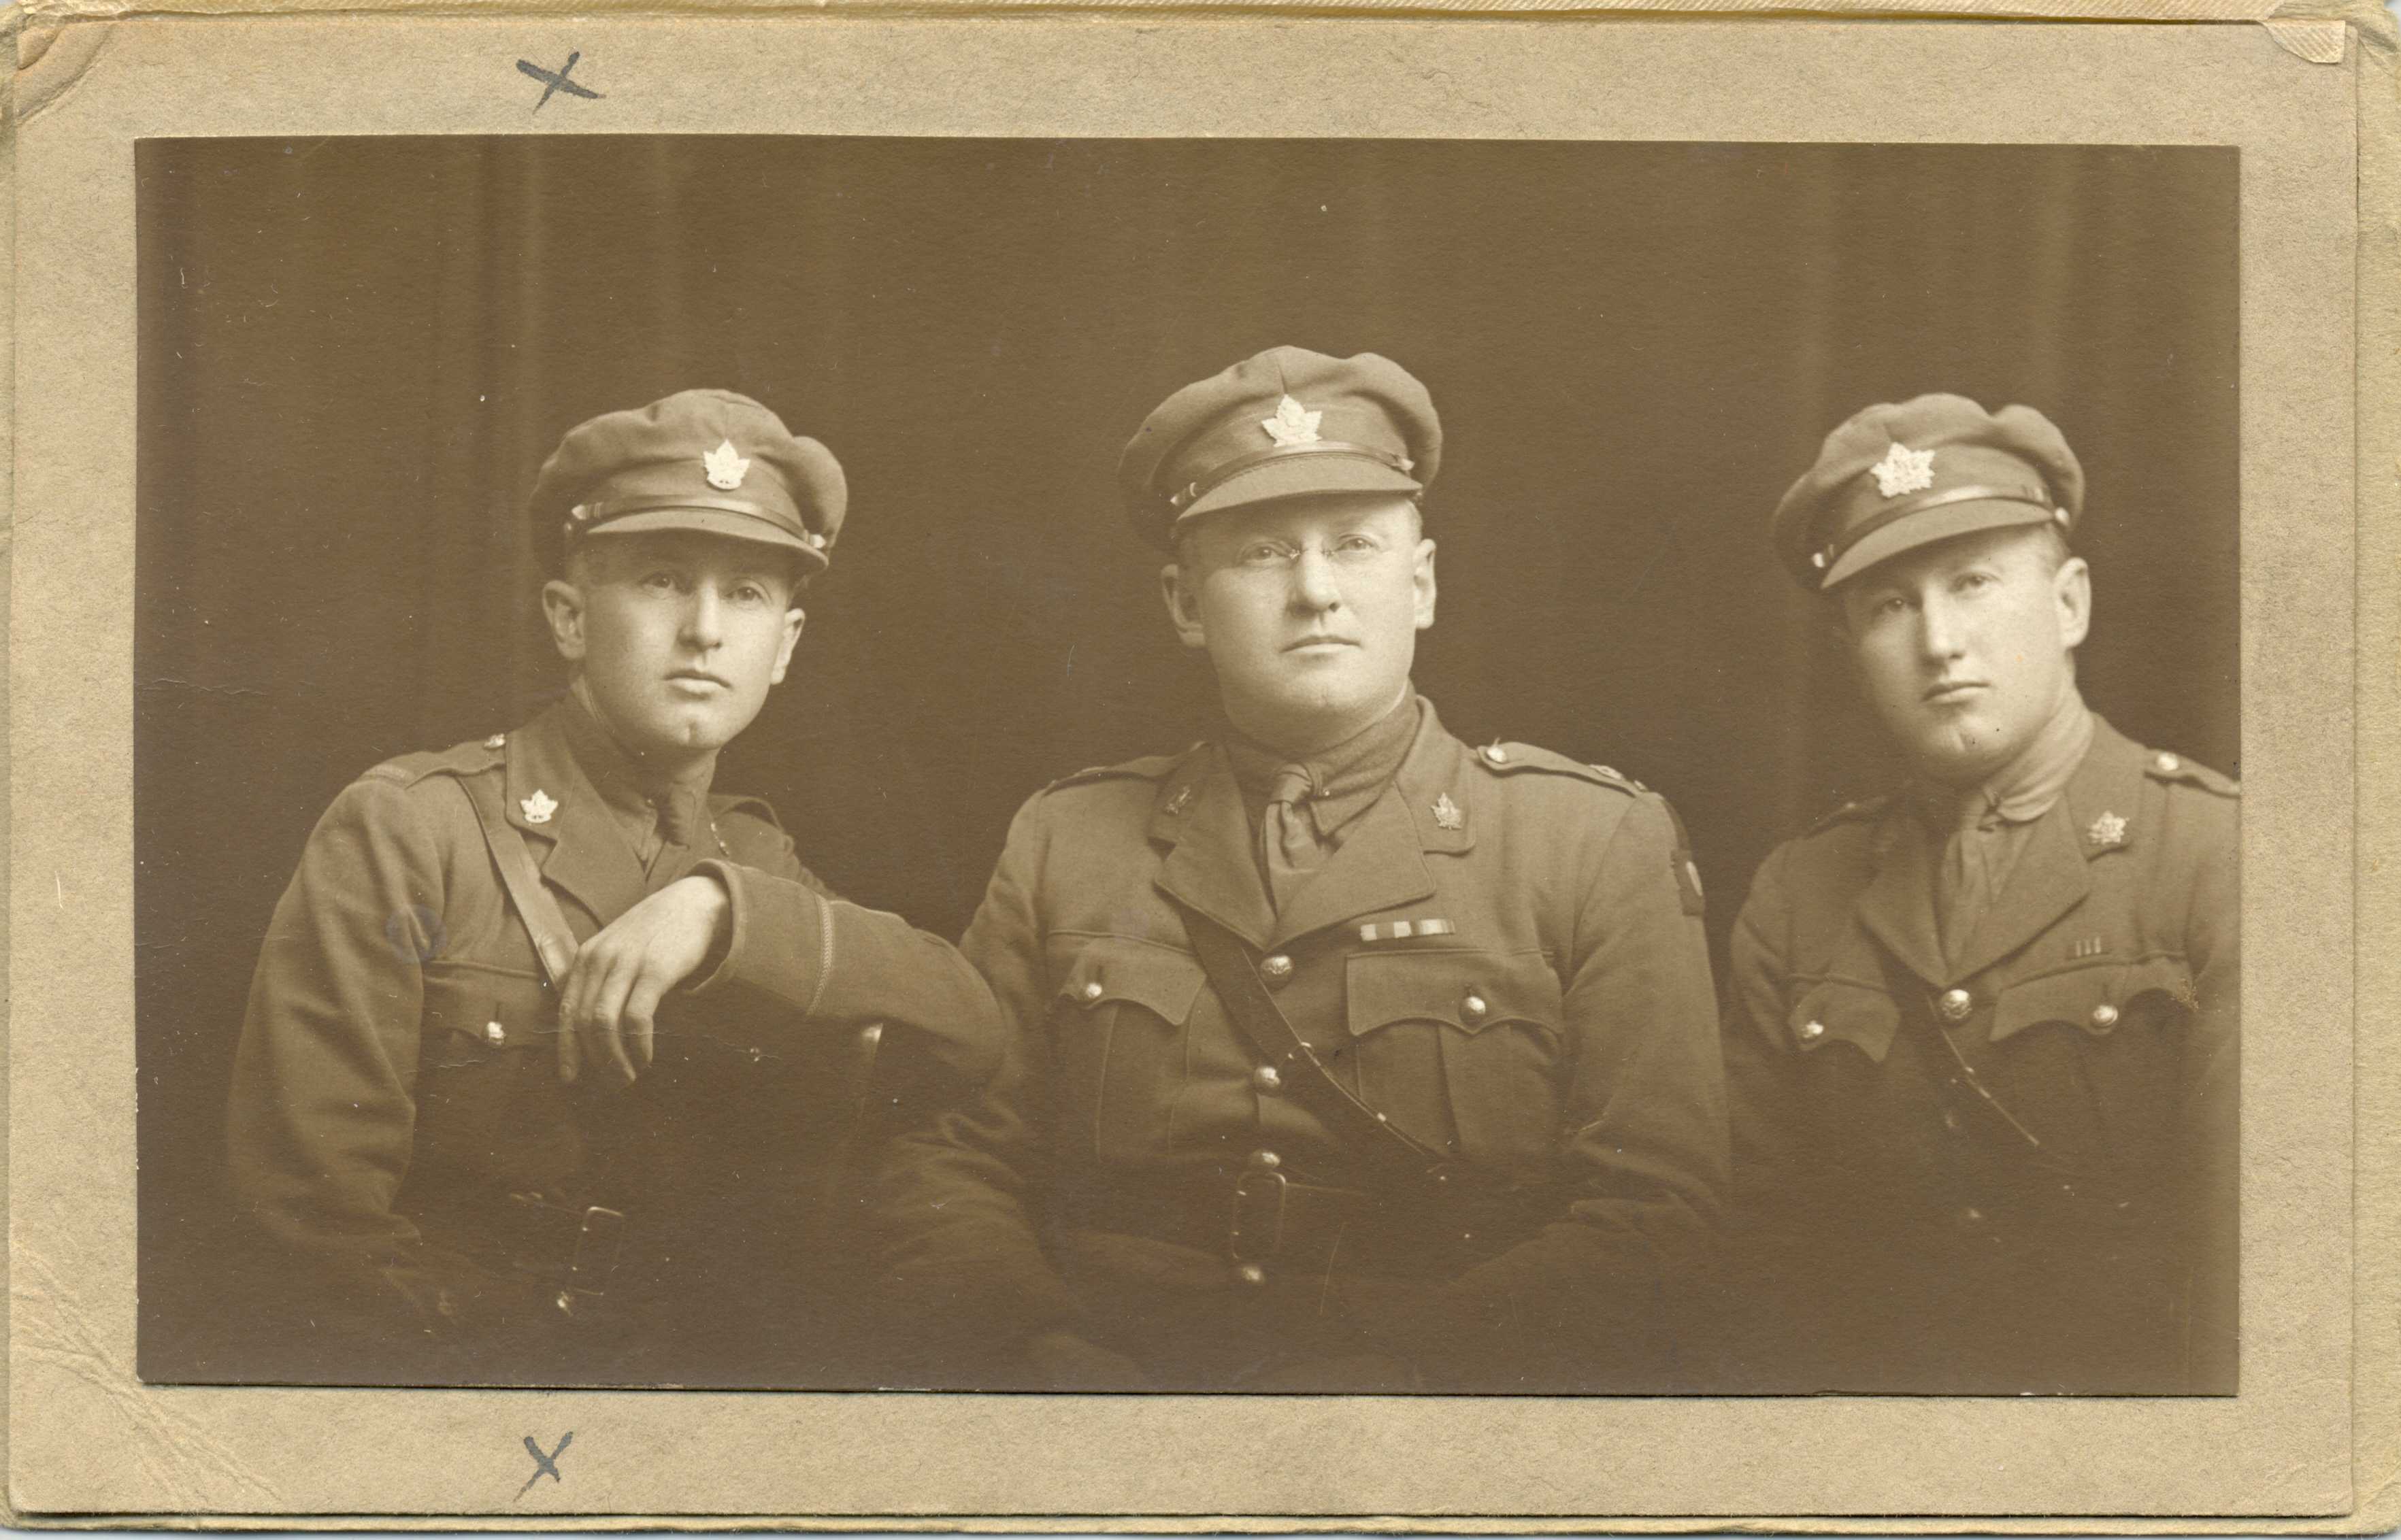 Sepia tone photo. Three men are posed in seated positions, facing the camera. They wear military dress, including caps.